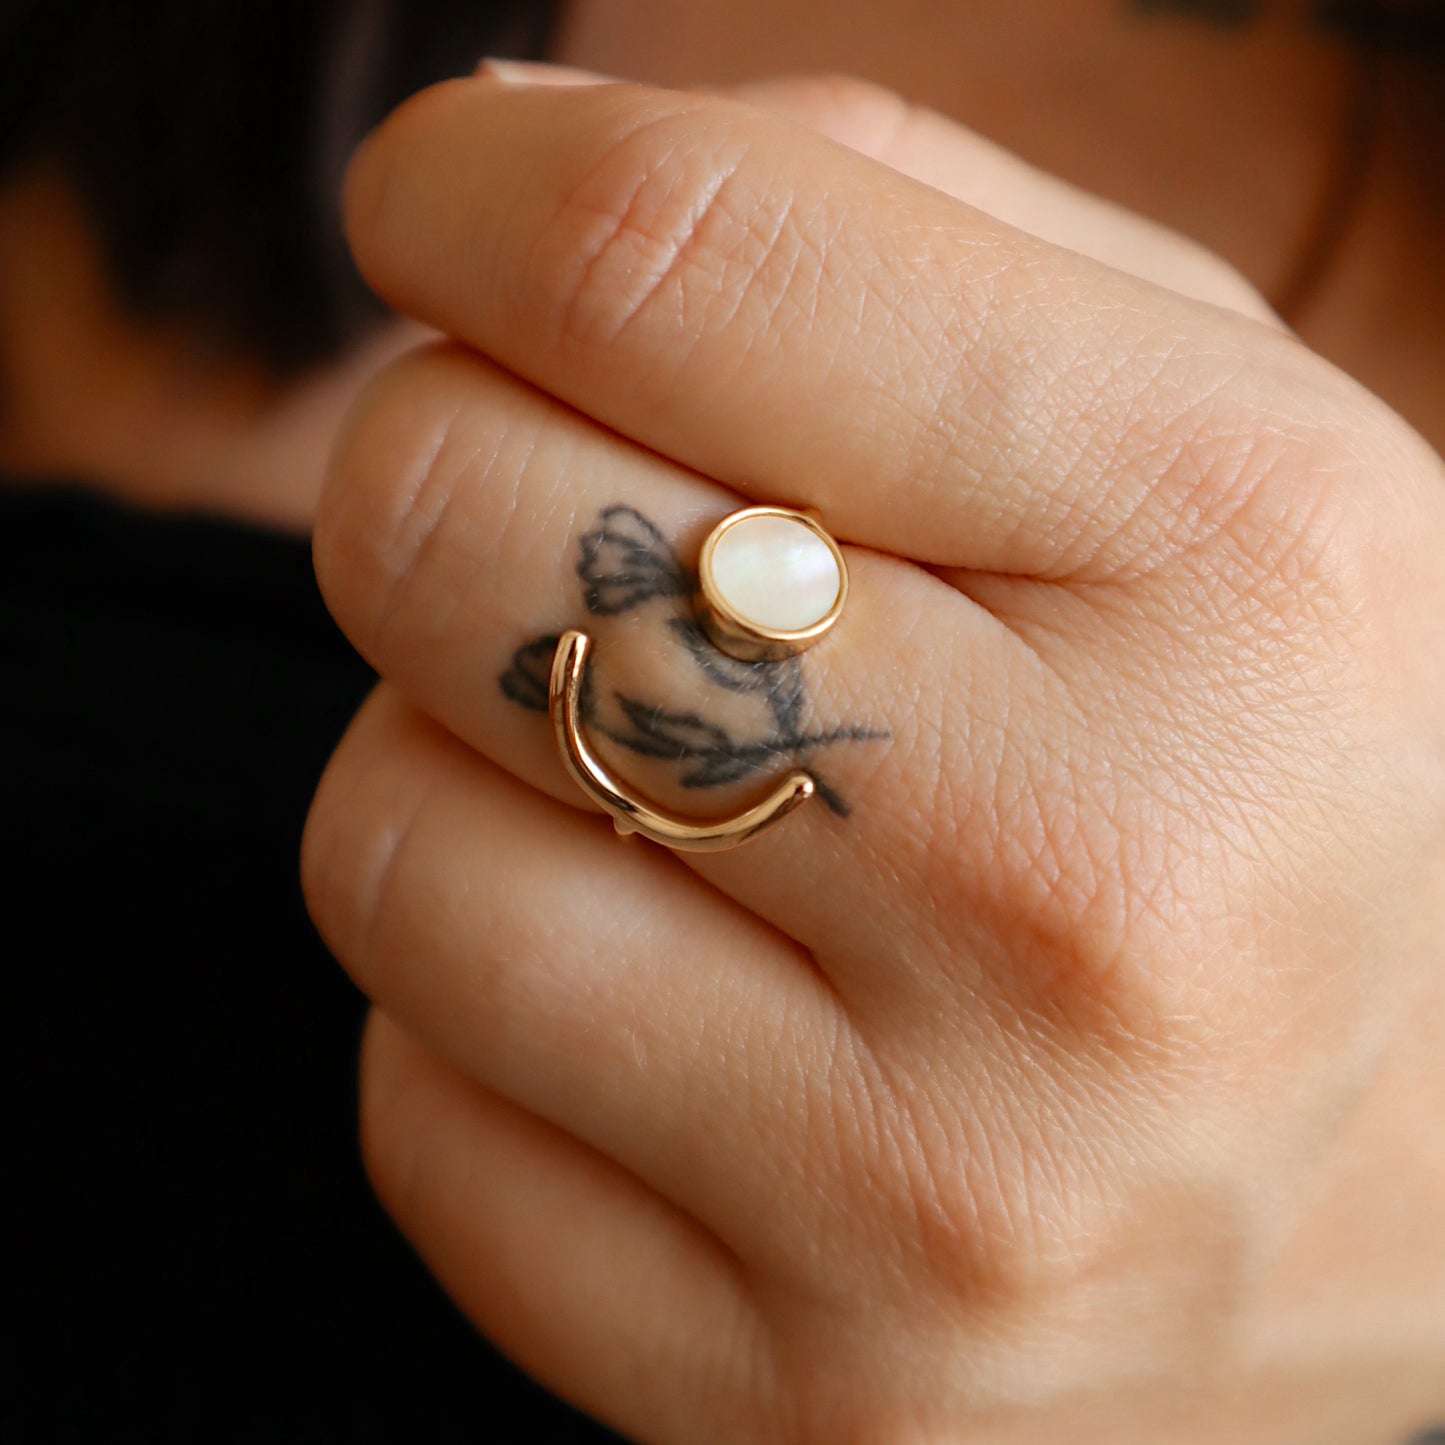 The Draco Ring